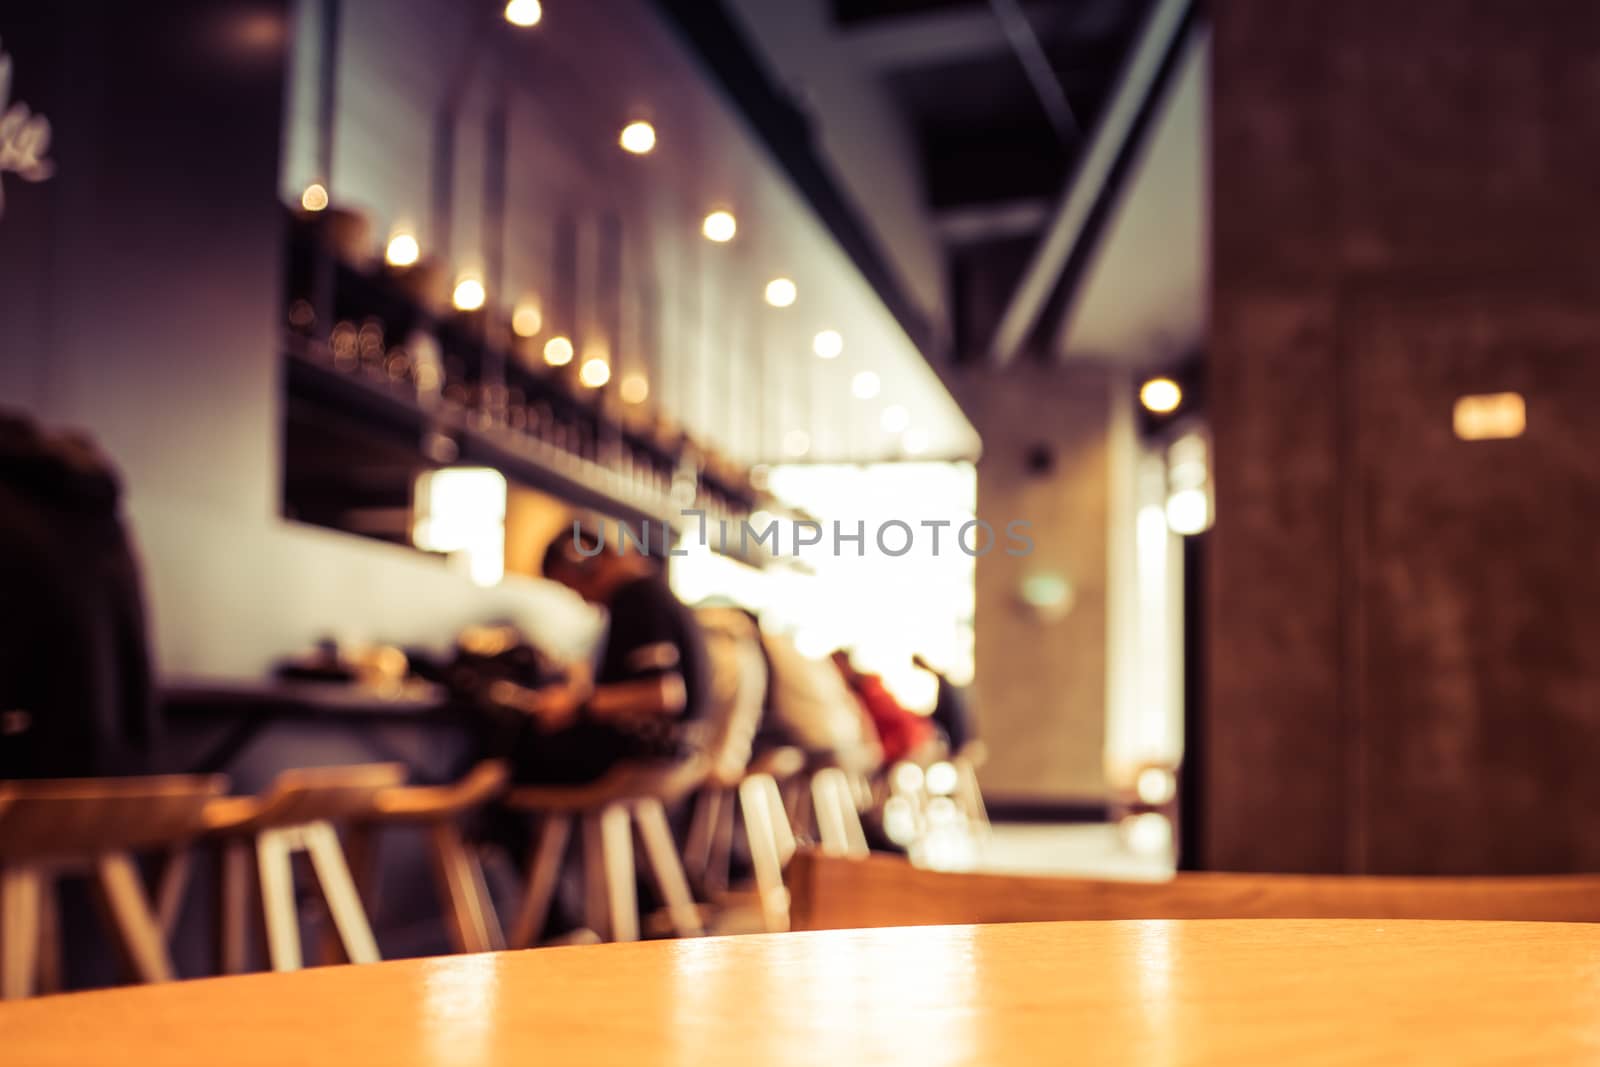 A cup of coffee - cafe blur background with warm tones